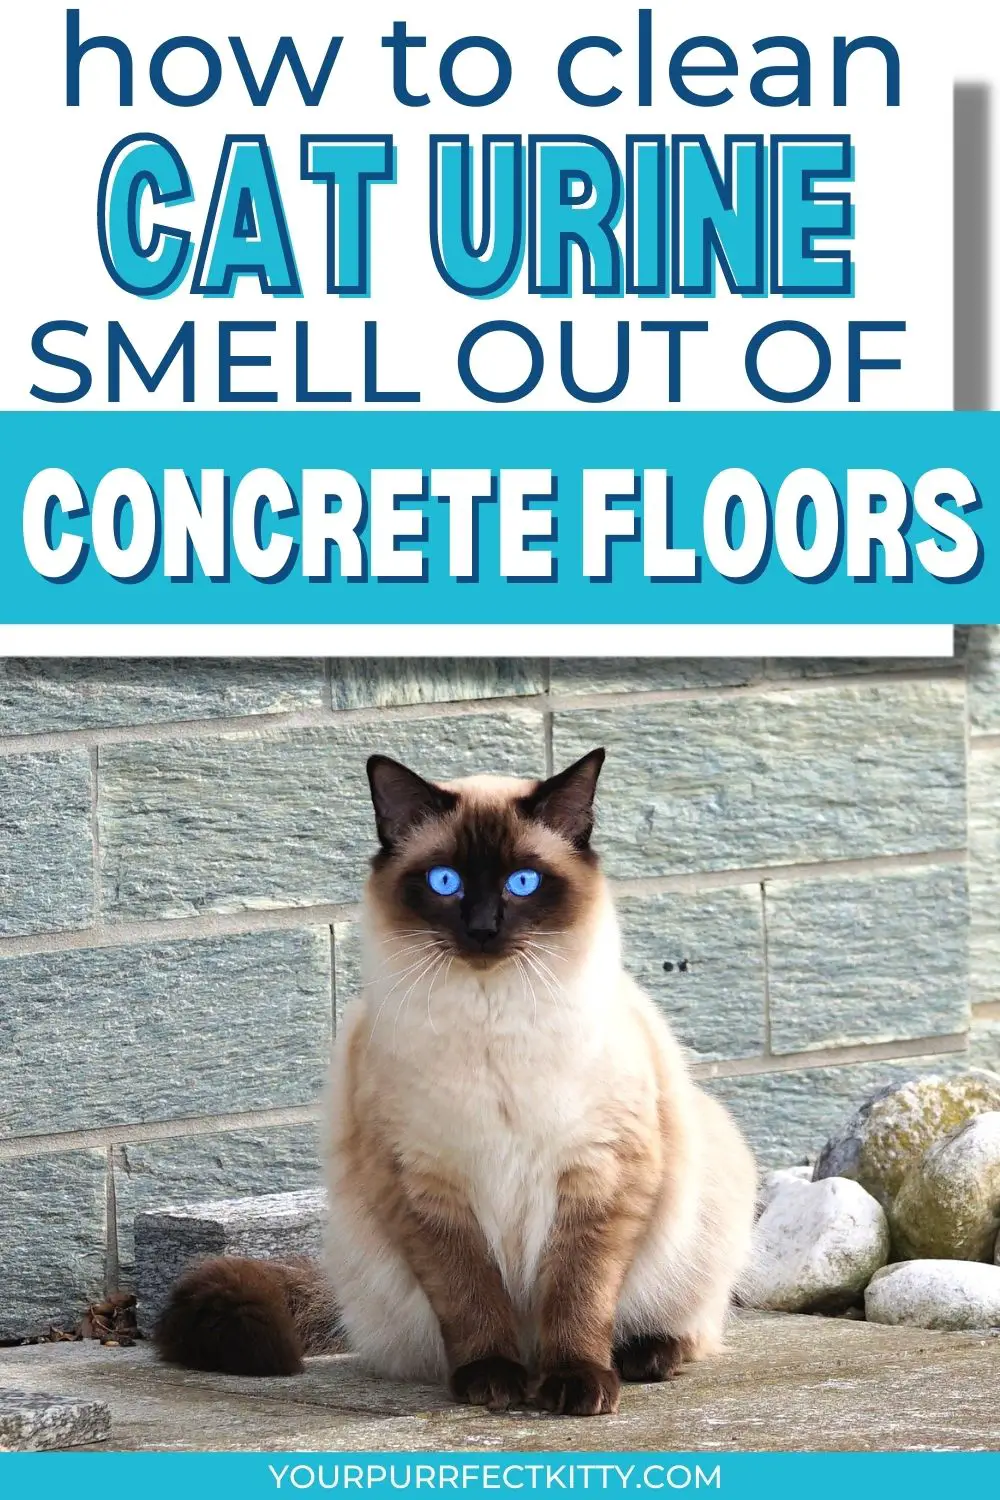 how to get cat urine smell out of concrete floors